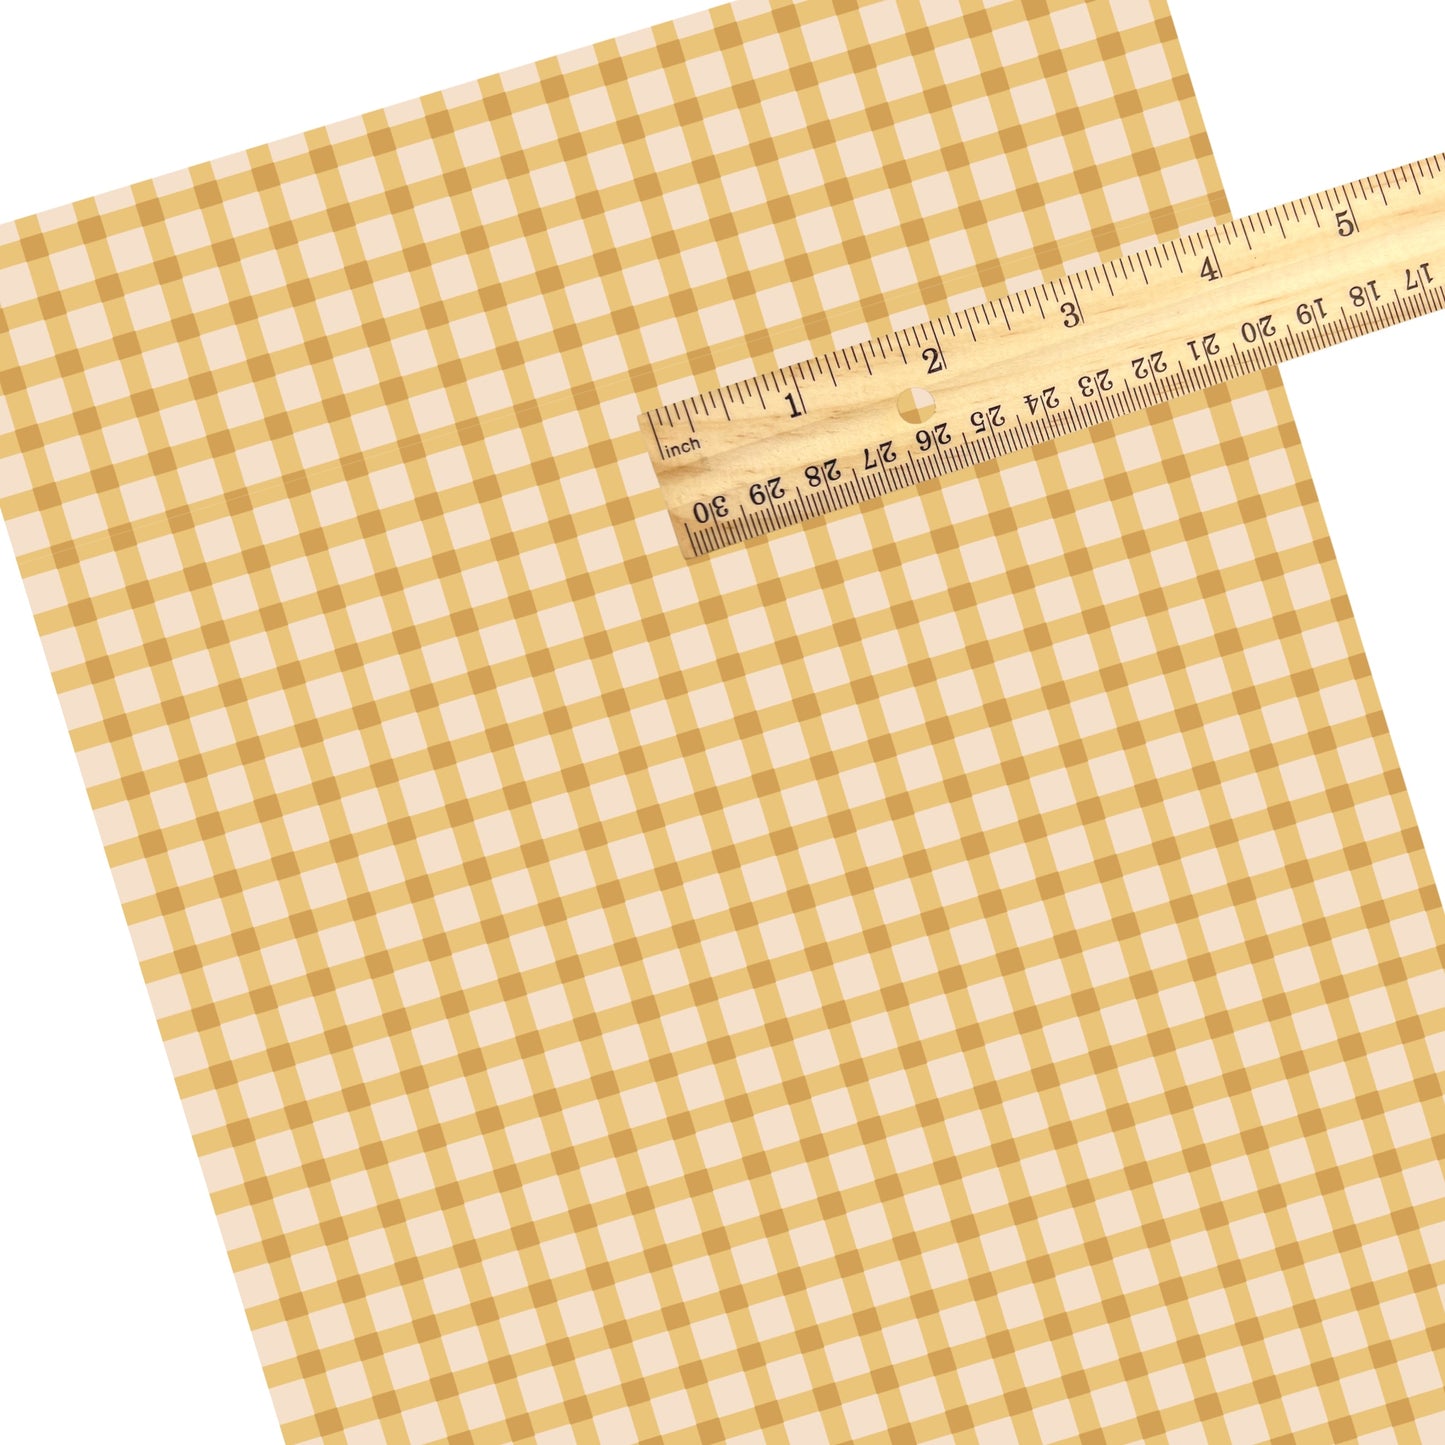 These summer faux leather sheets contain the following design elements: summer haze yellow and cream plaid pattern. Our CPSIA compliant faux leather sheets or rolls can be used for all types of crafting projects.